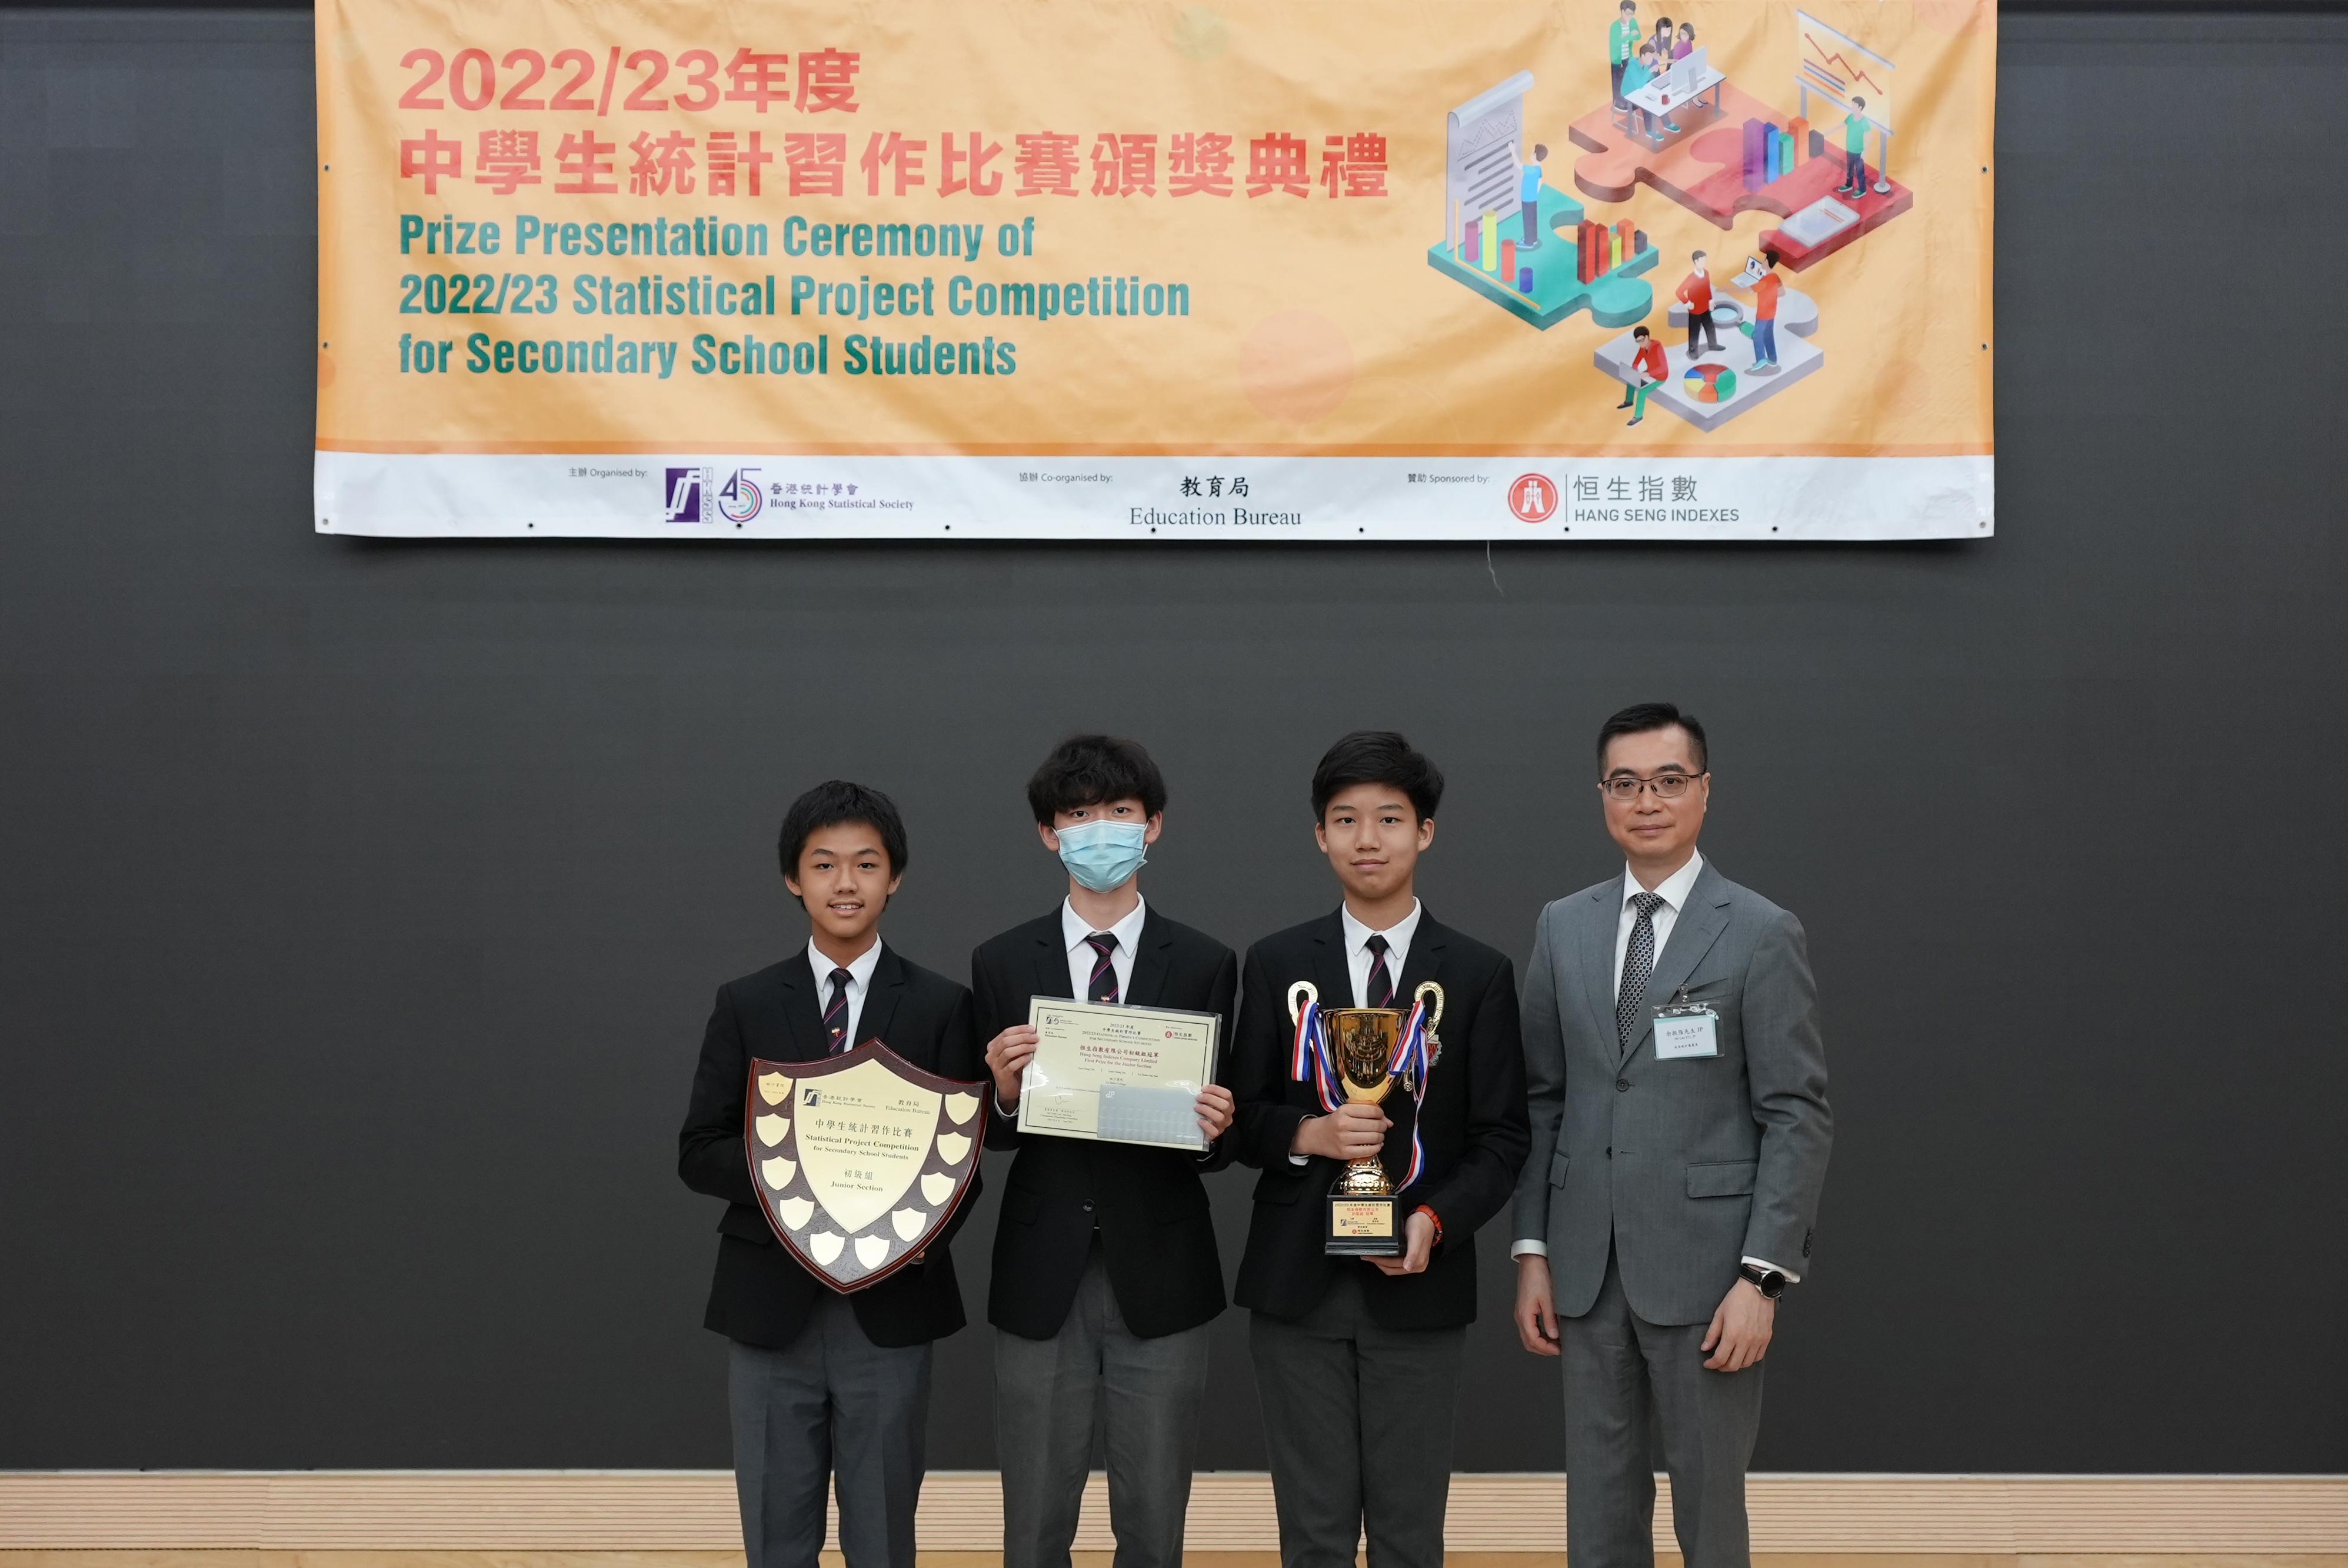 The Commissioner for Census and Statistics, Mr Leo Yu (first right), presented prizes to the Champion of the Junior Section at the prize presentation ceremony of 2022/23 Statistical Project Competition for Secondary School Students today (June 3).